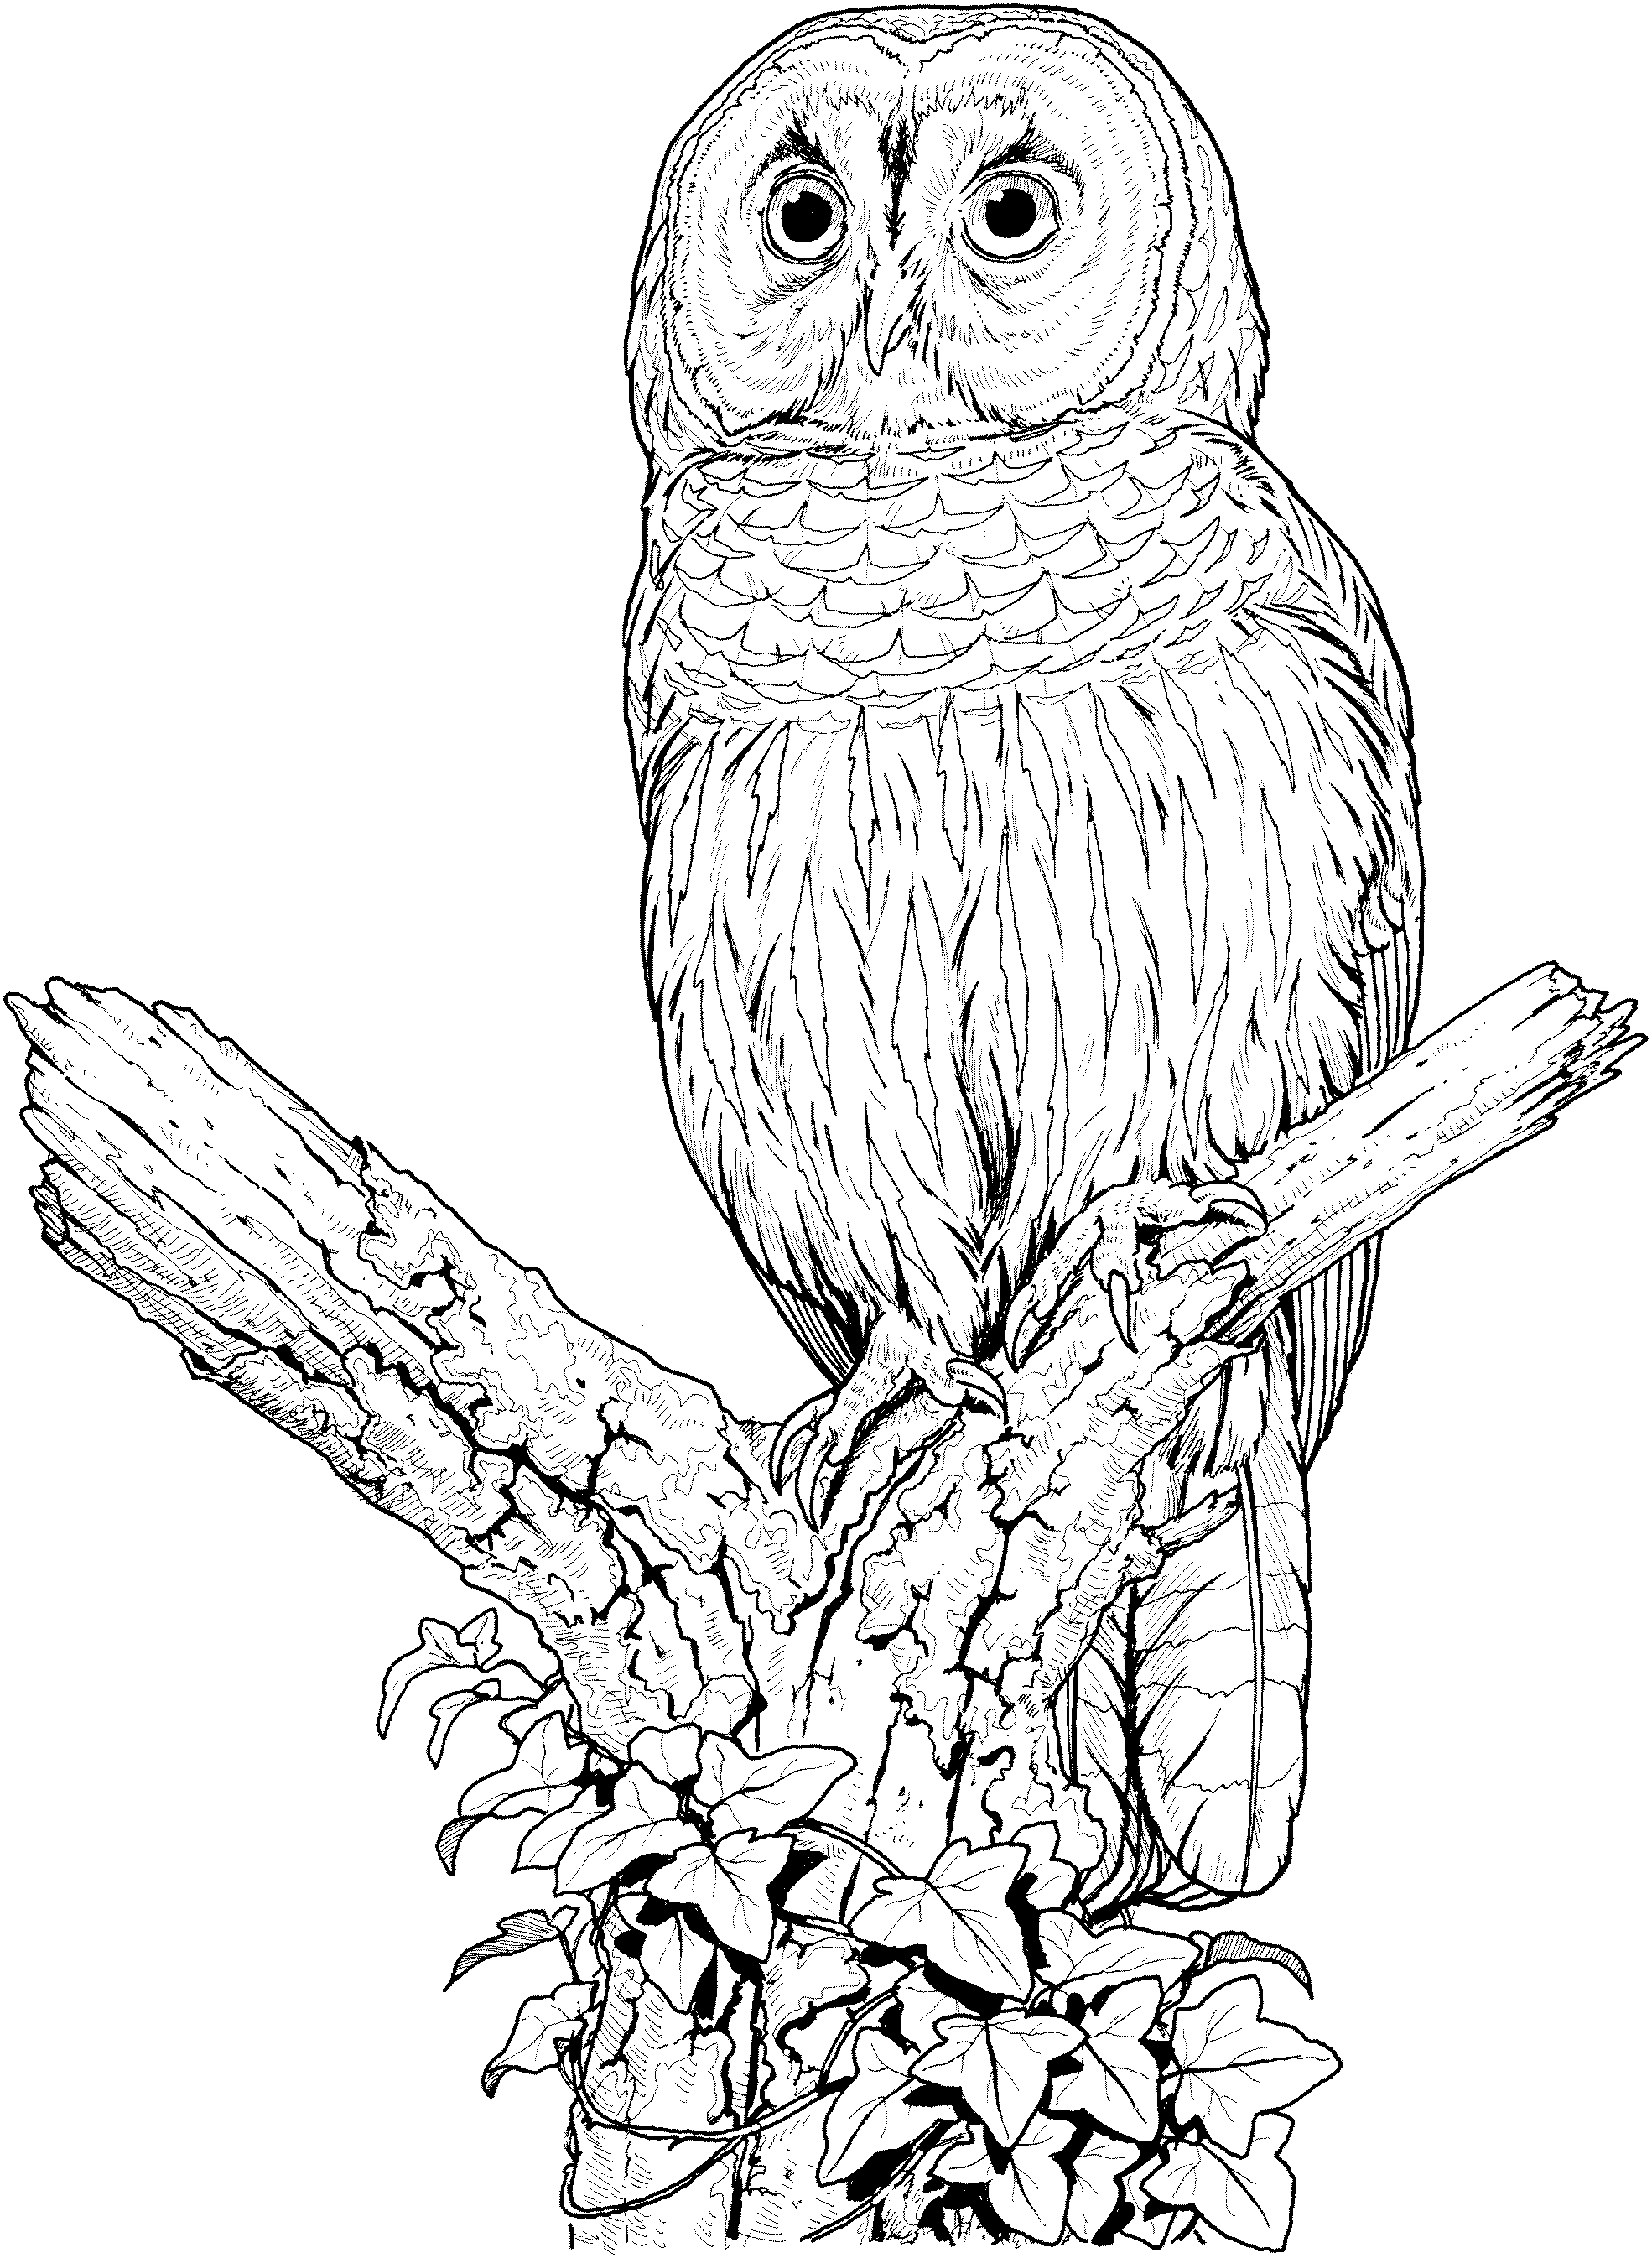 printable owl images free printable owl coloring pages for kids cool2bkids printable images owl 